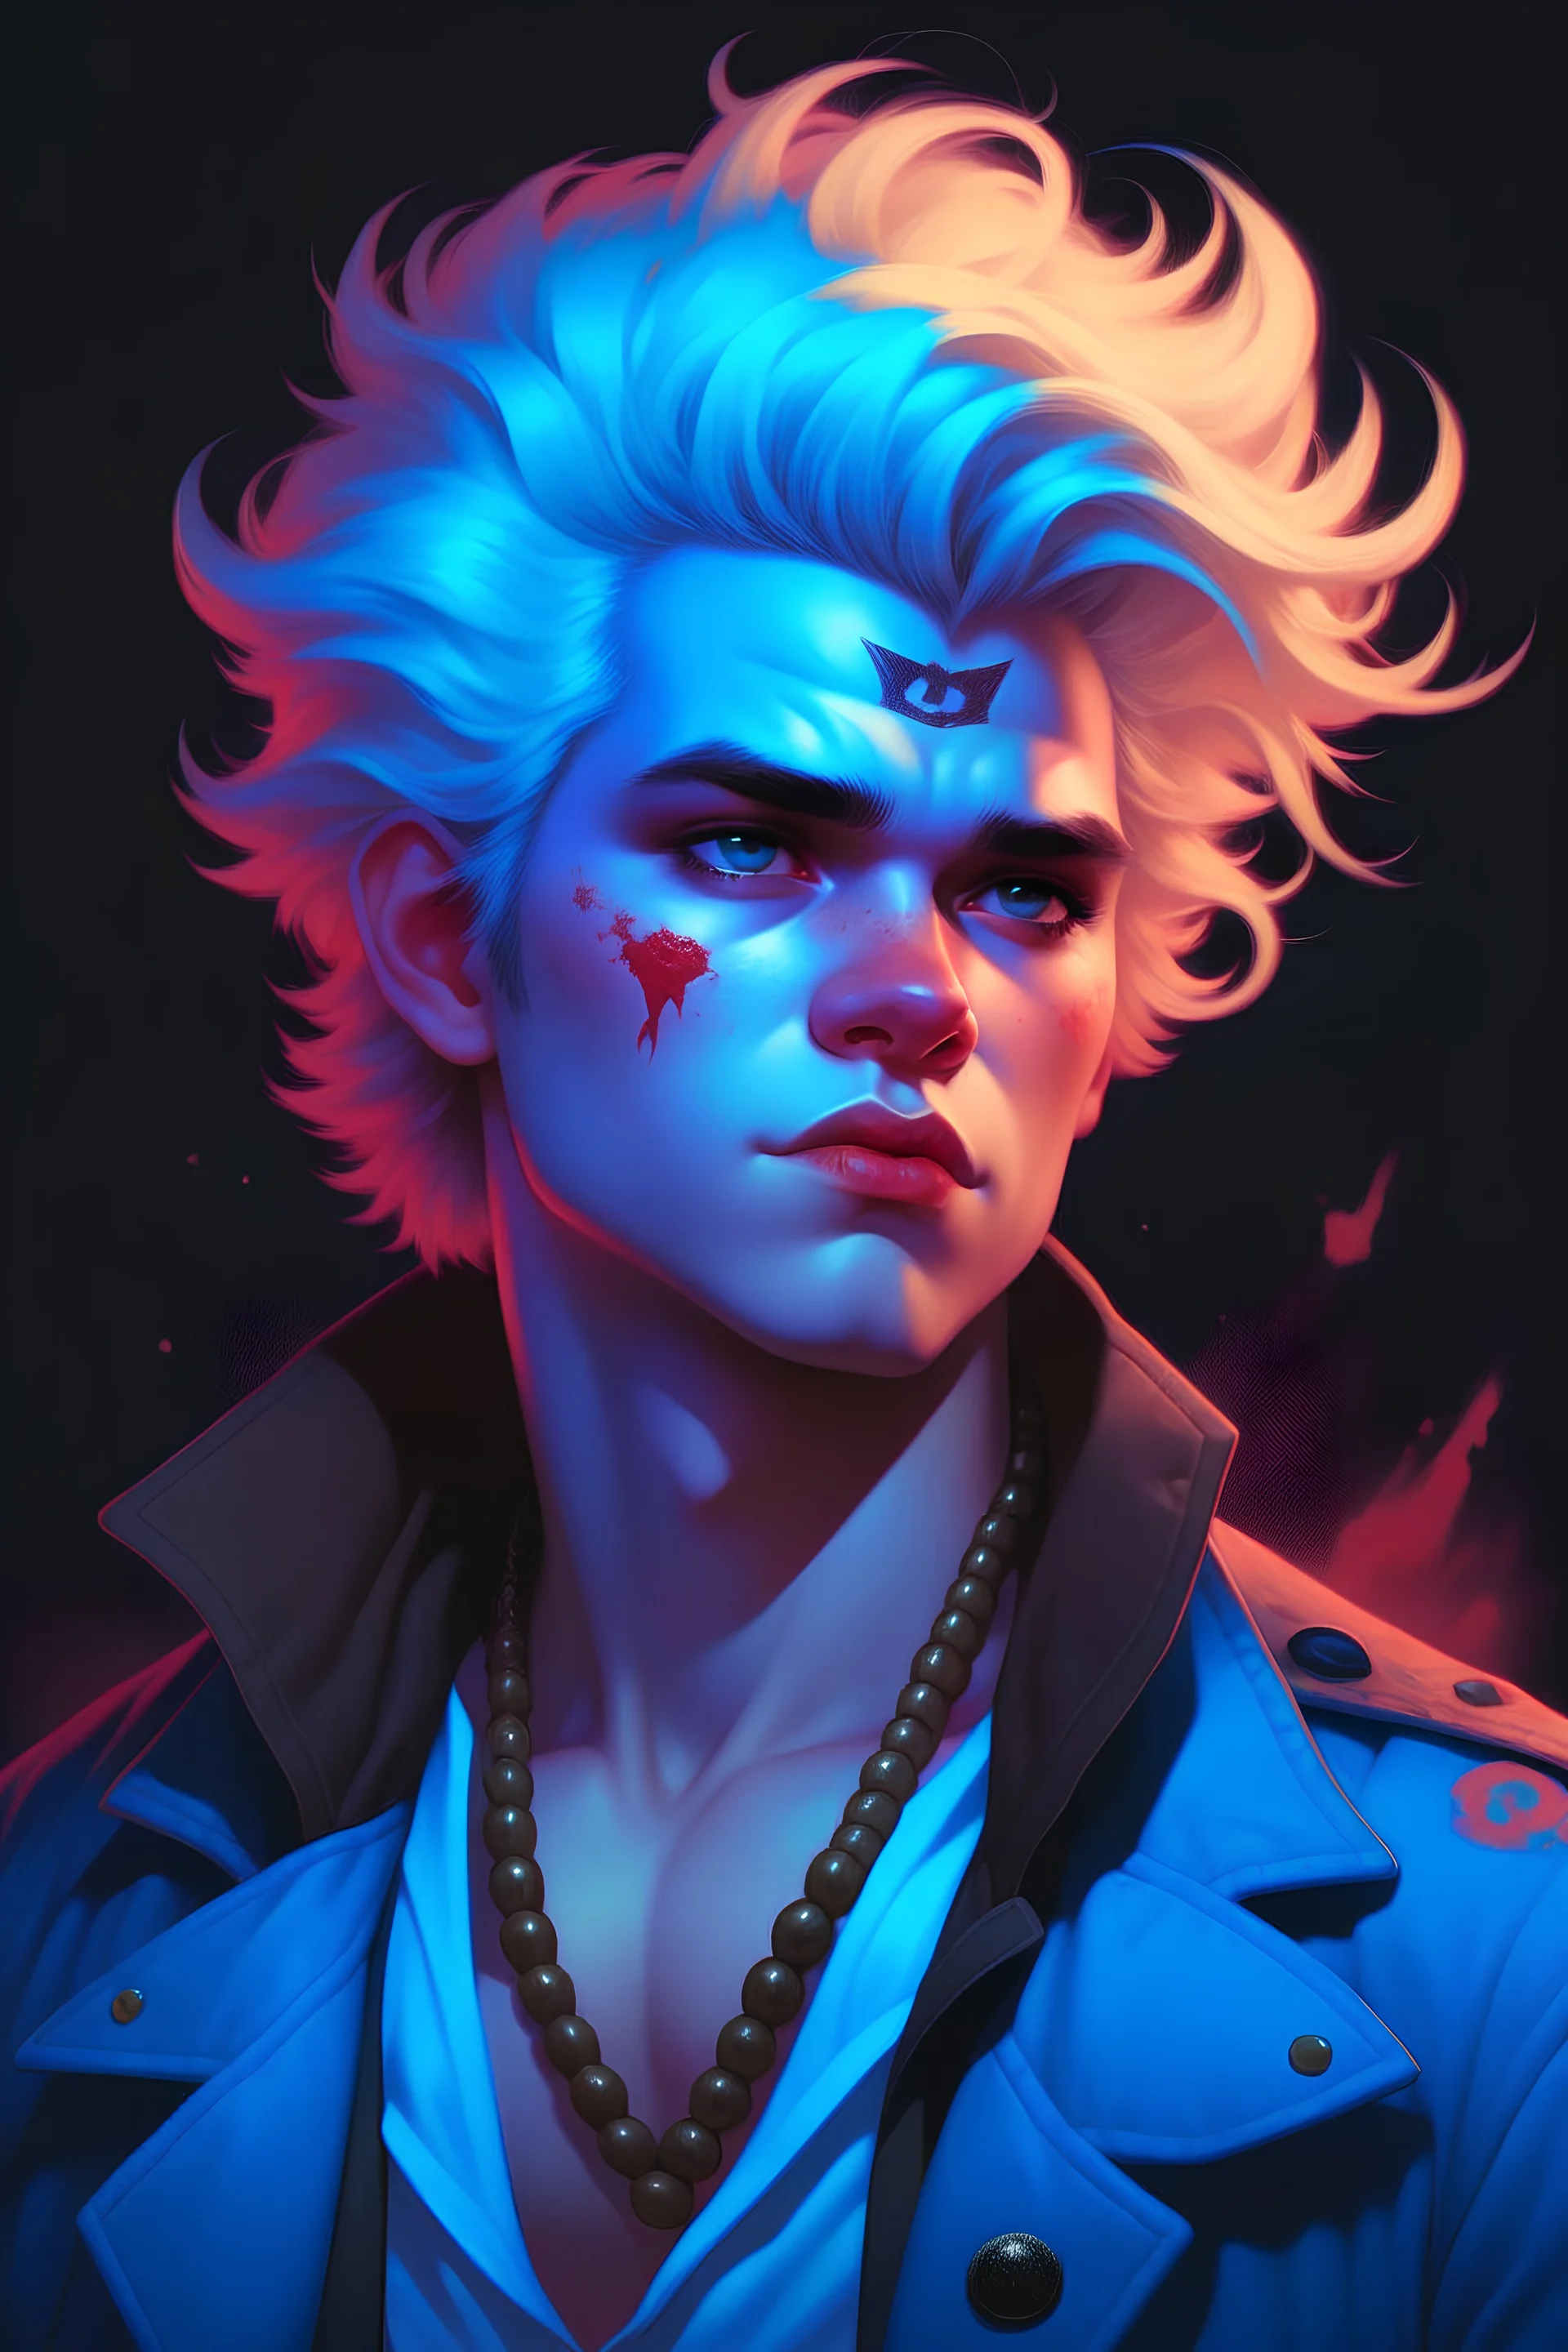 Highly detailed portrait of David from The Lost Boys 1987, by Loish, by Bryan Lee O'Malley, by Cliff Chiang, by Dana Terrace, inspired by Image Comics, inspired by Marvel Comics, inspired by DC Comics, inspired by The Owl House, inspired by capcom, inspired by Netflix Castlevania